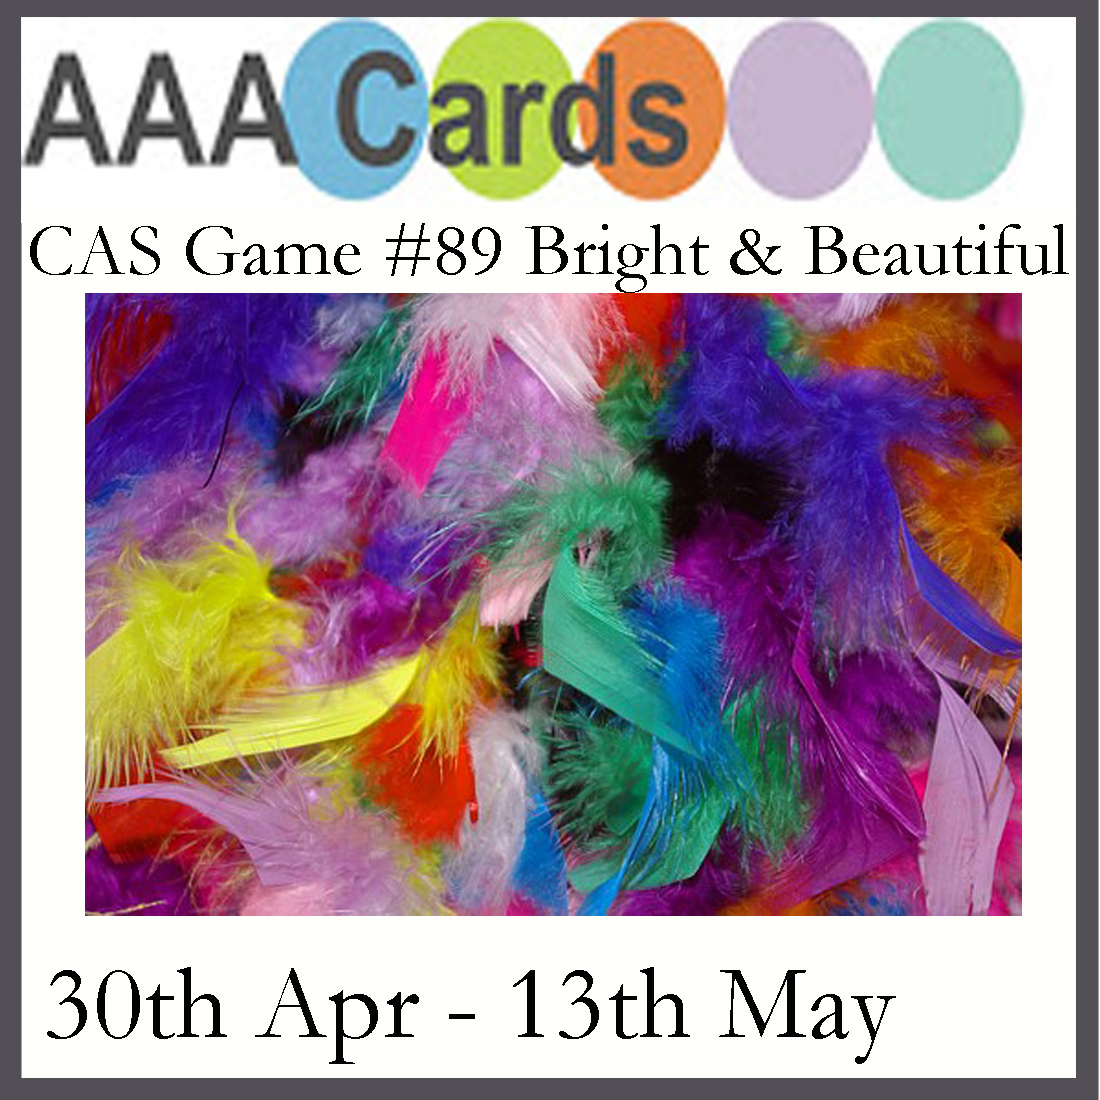 CAS Cards Challenge. AAA Card. Be bright be beautiful